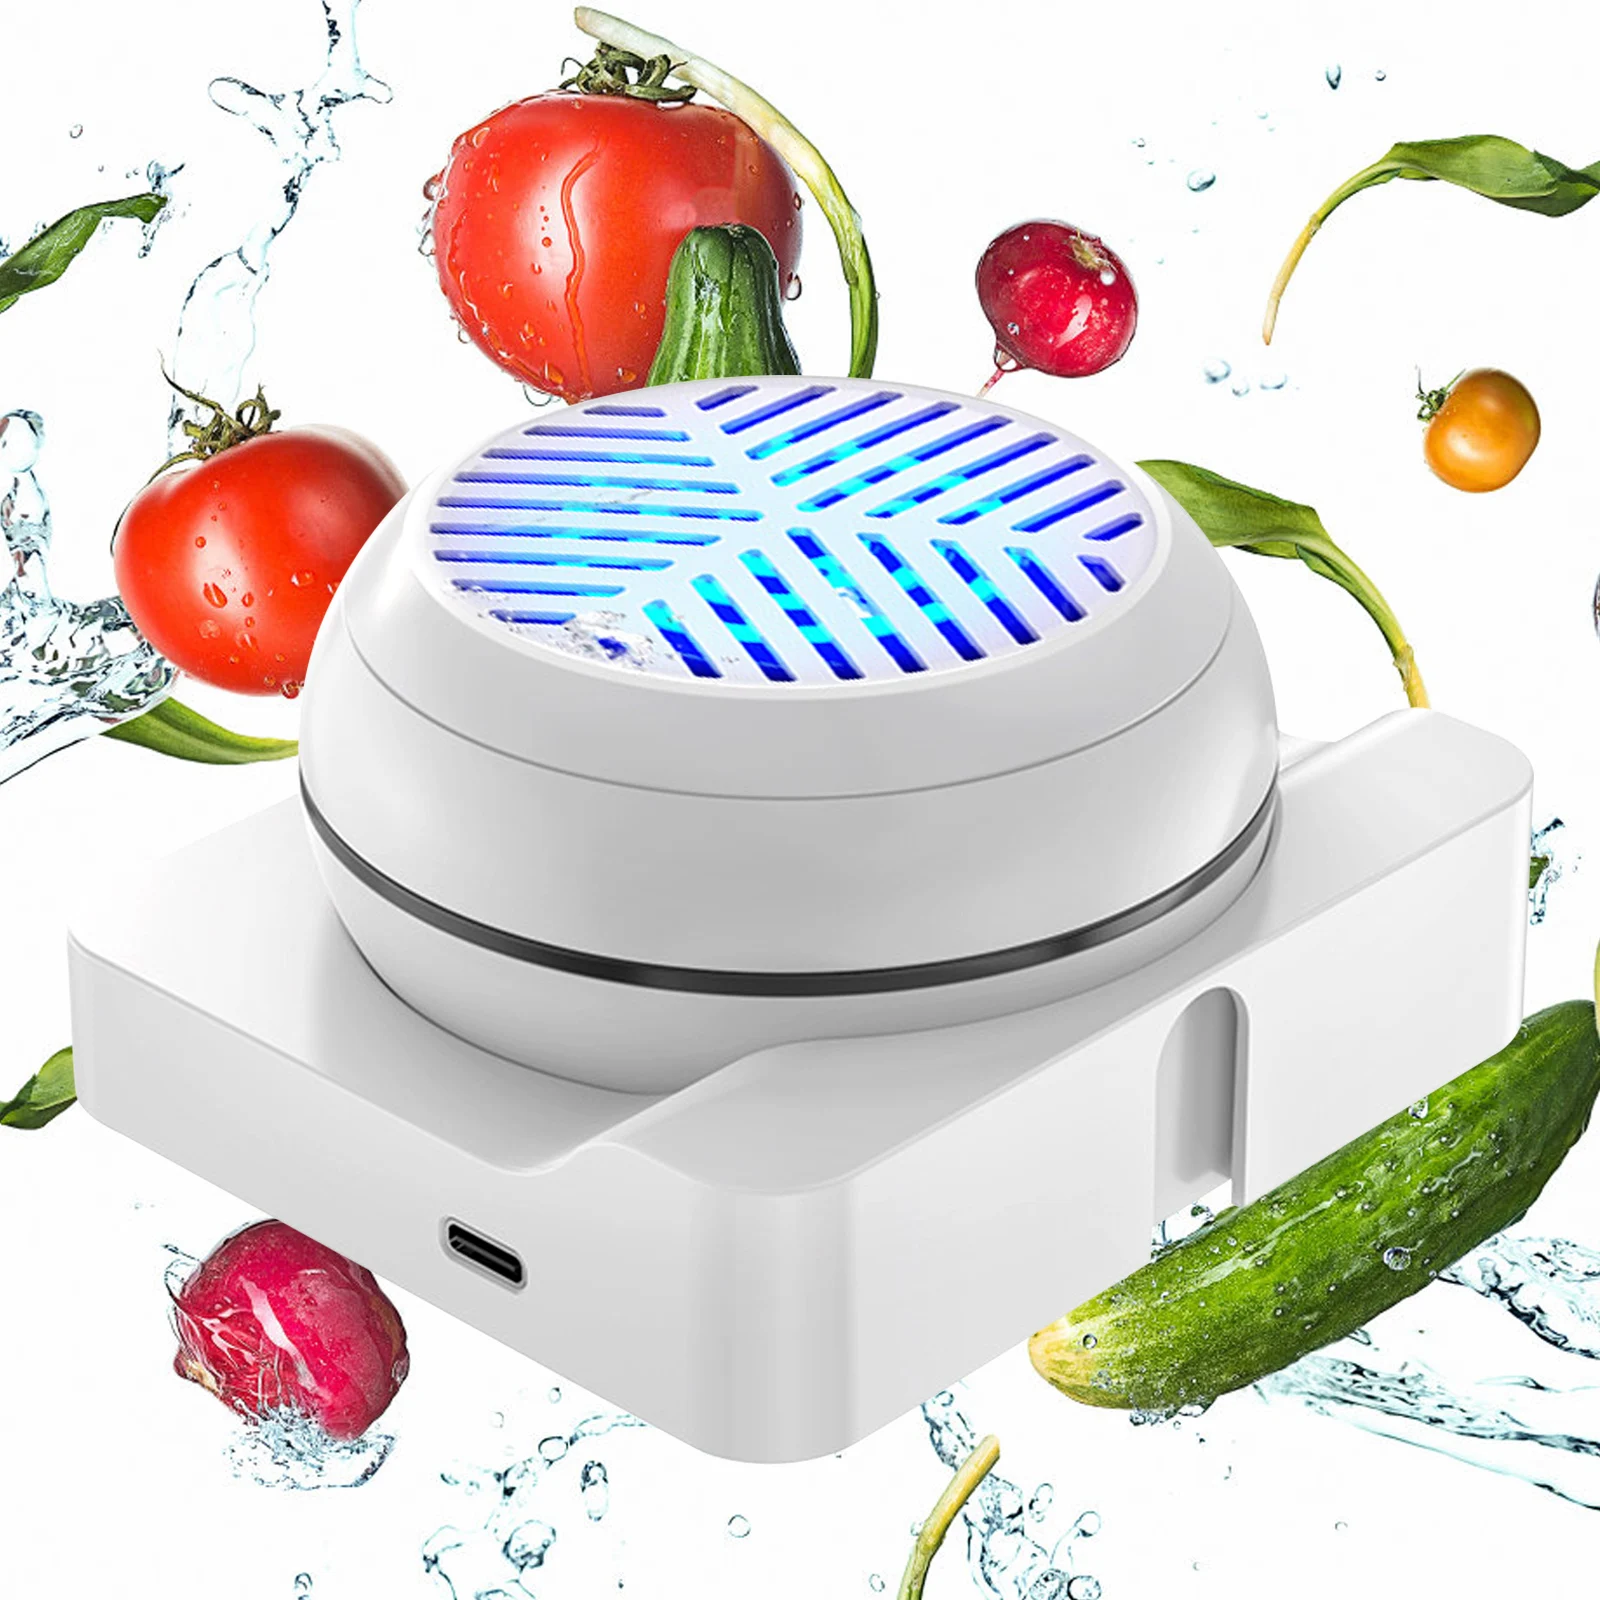 

Fruit Cleaning Machine IPX7 Waterproof Vegetable Washing Cleaner USB Rechargeable Food Purifier with 2500mAh Battery Portable